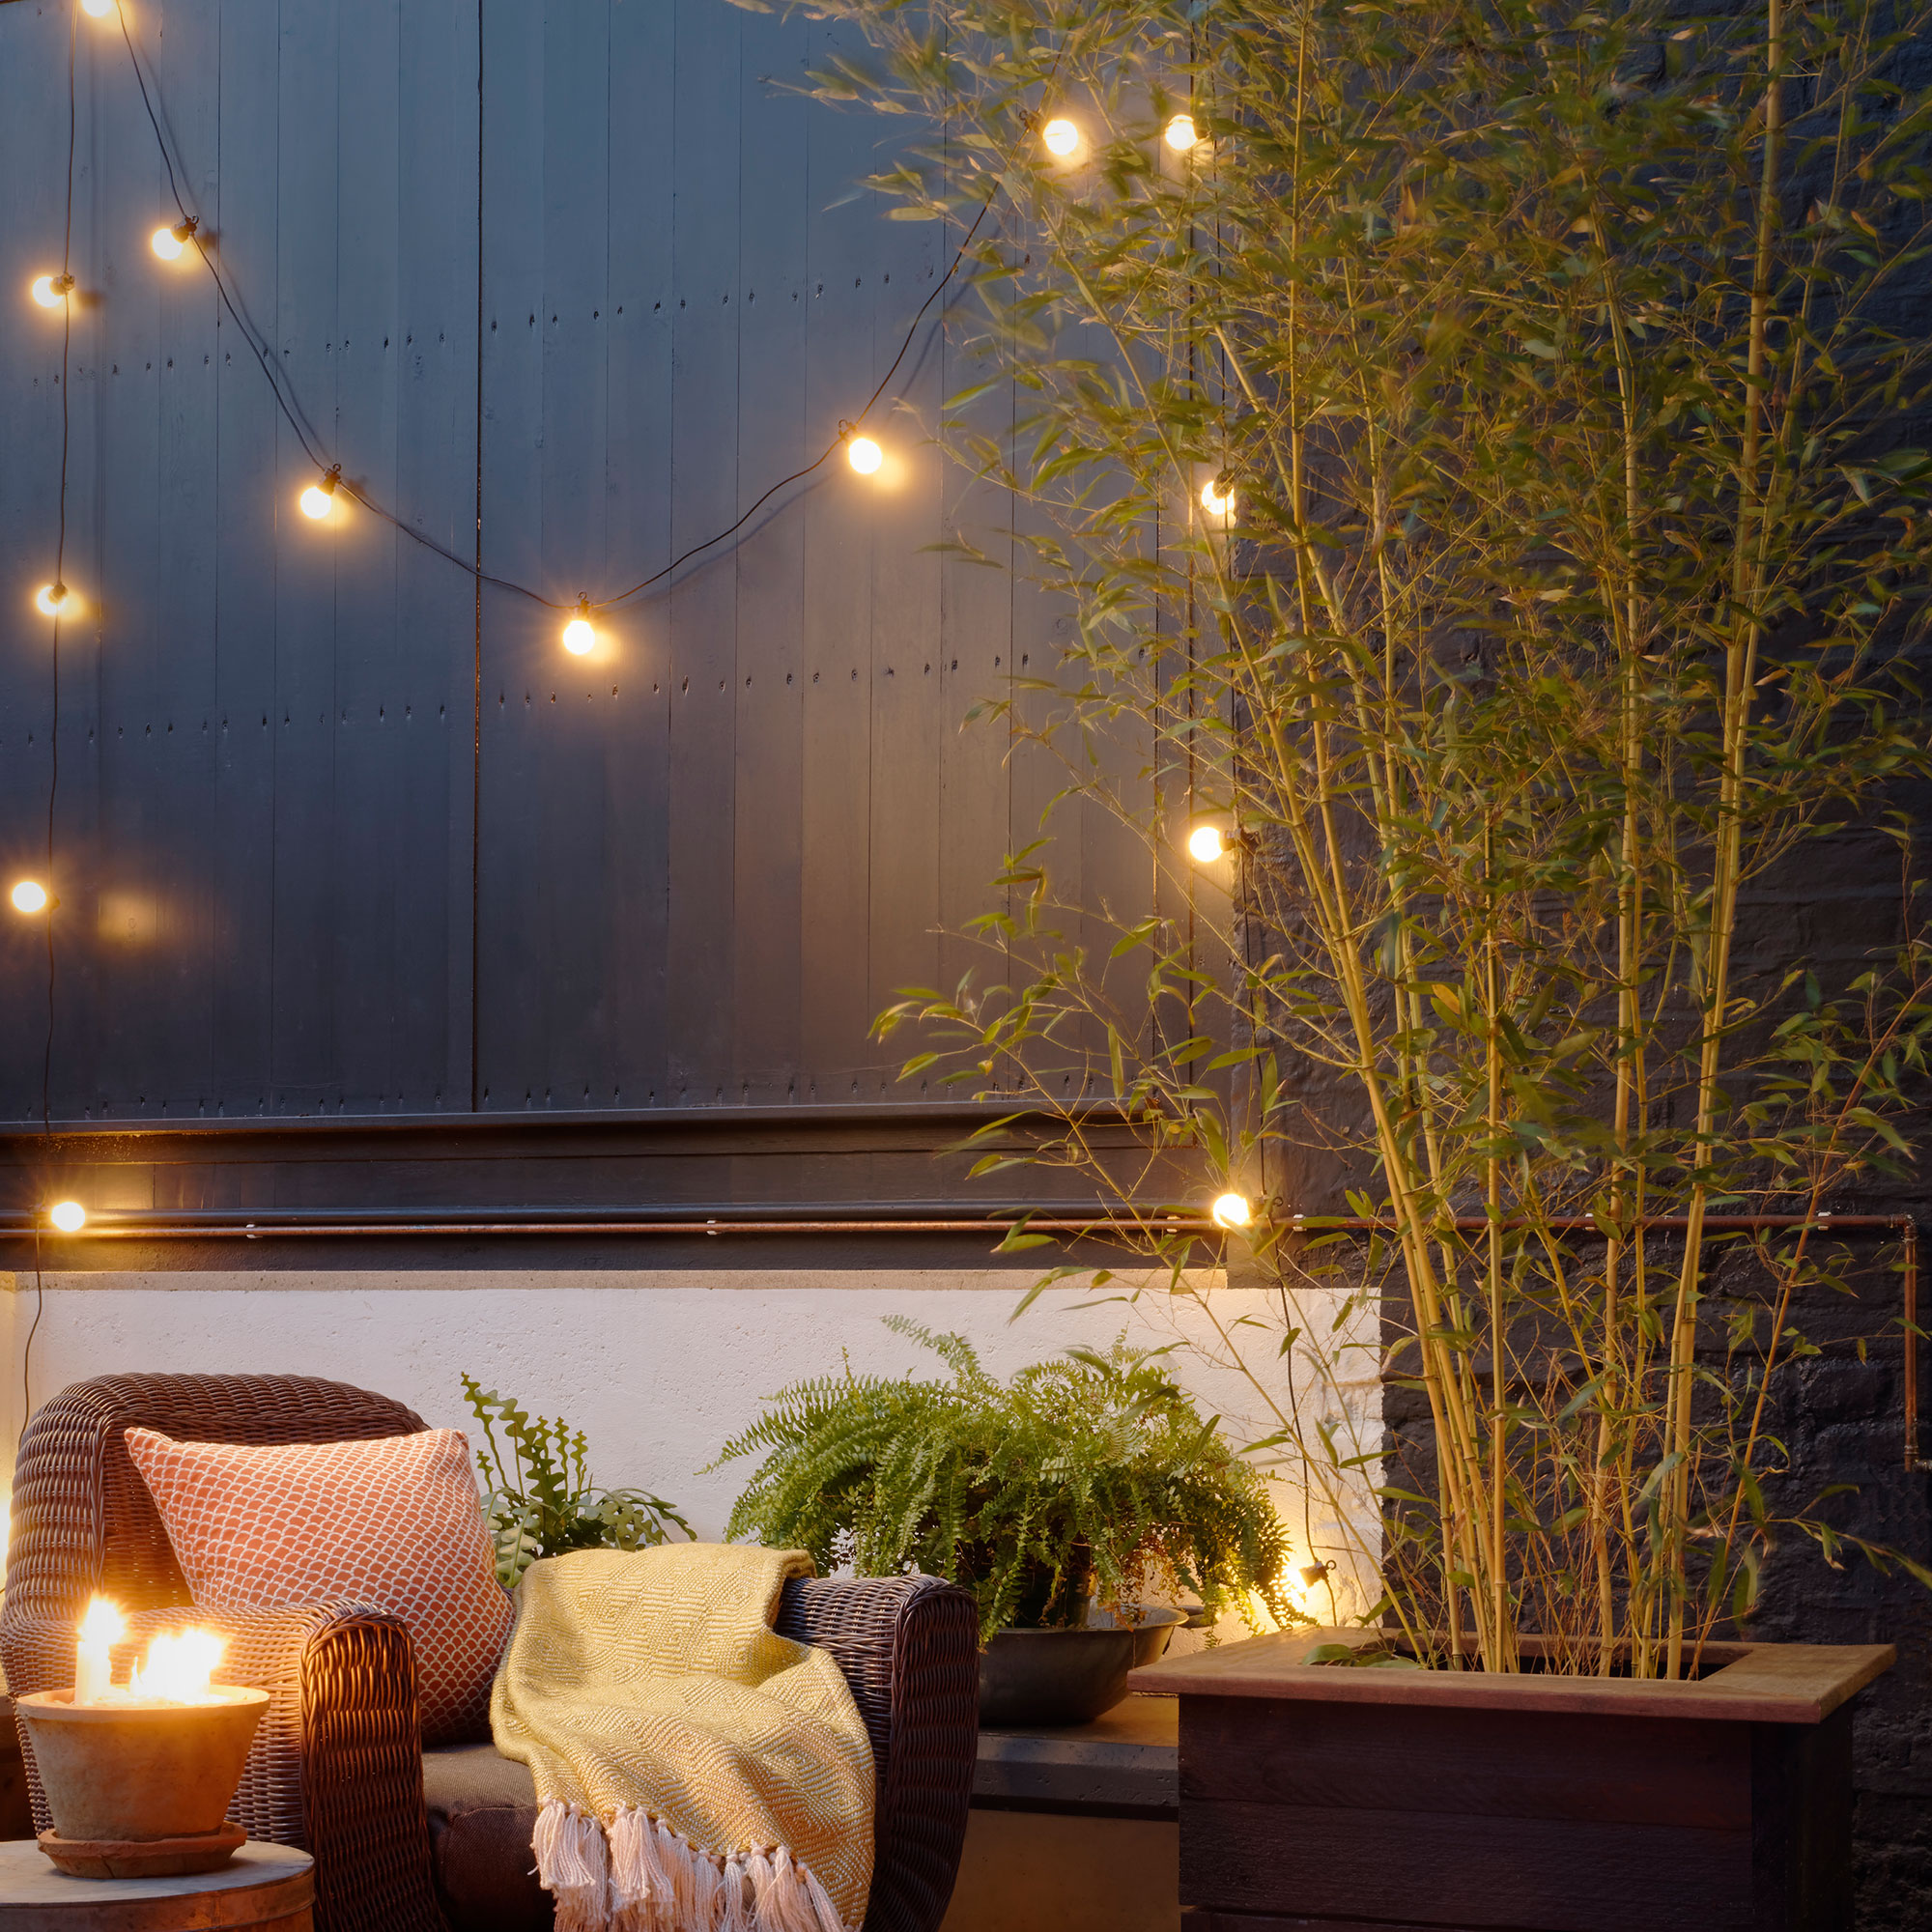 Outdoor wall lighting ideas   ways to use exterior wall lights in ...